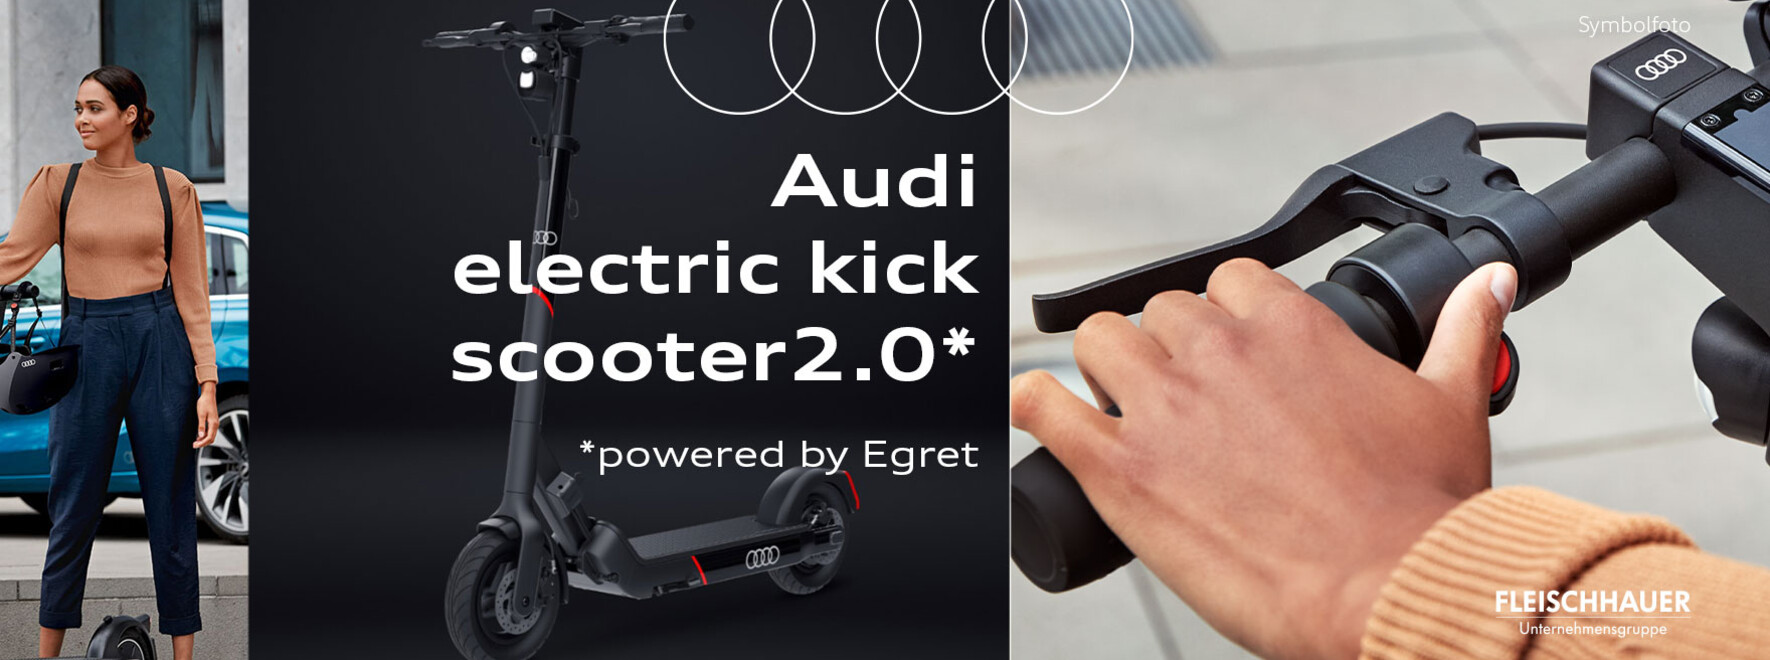 Audi electric kick scooter | Powered by Egret